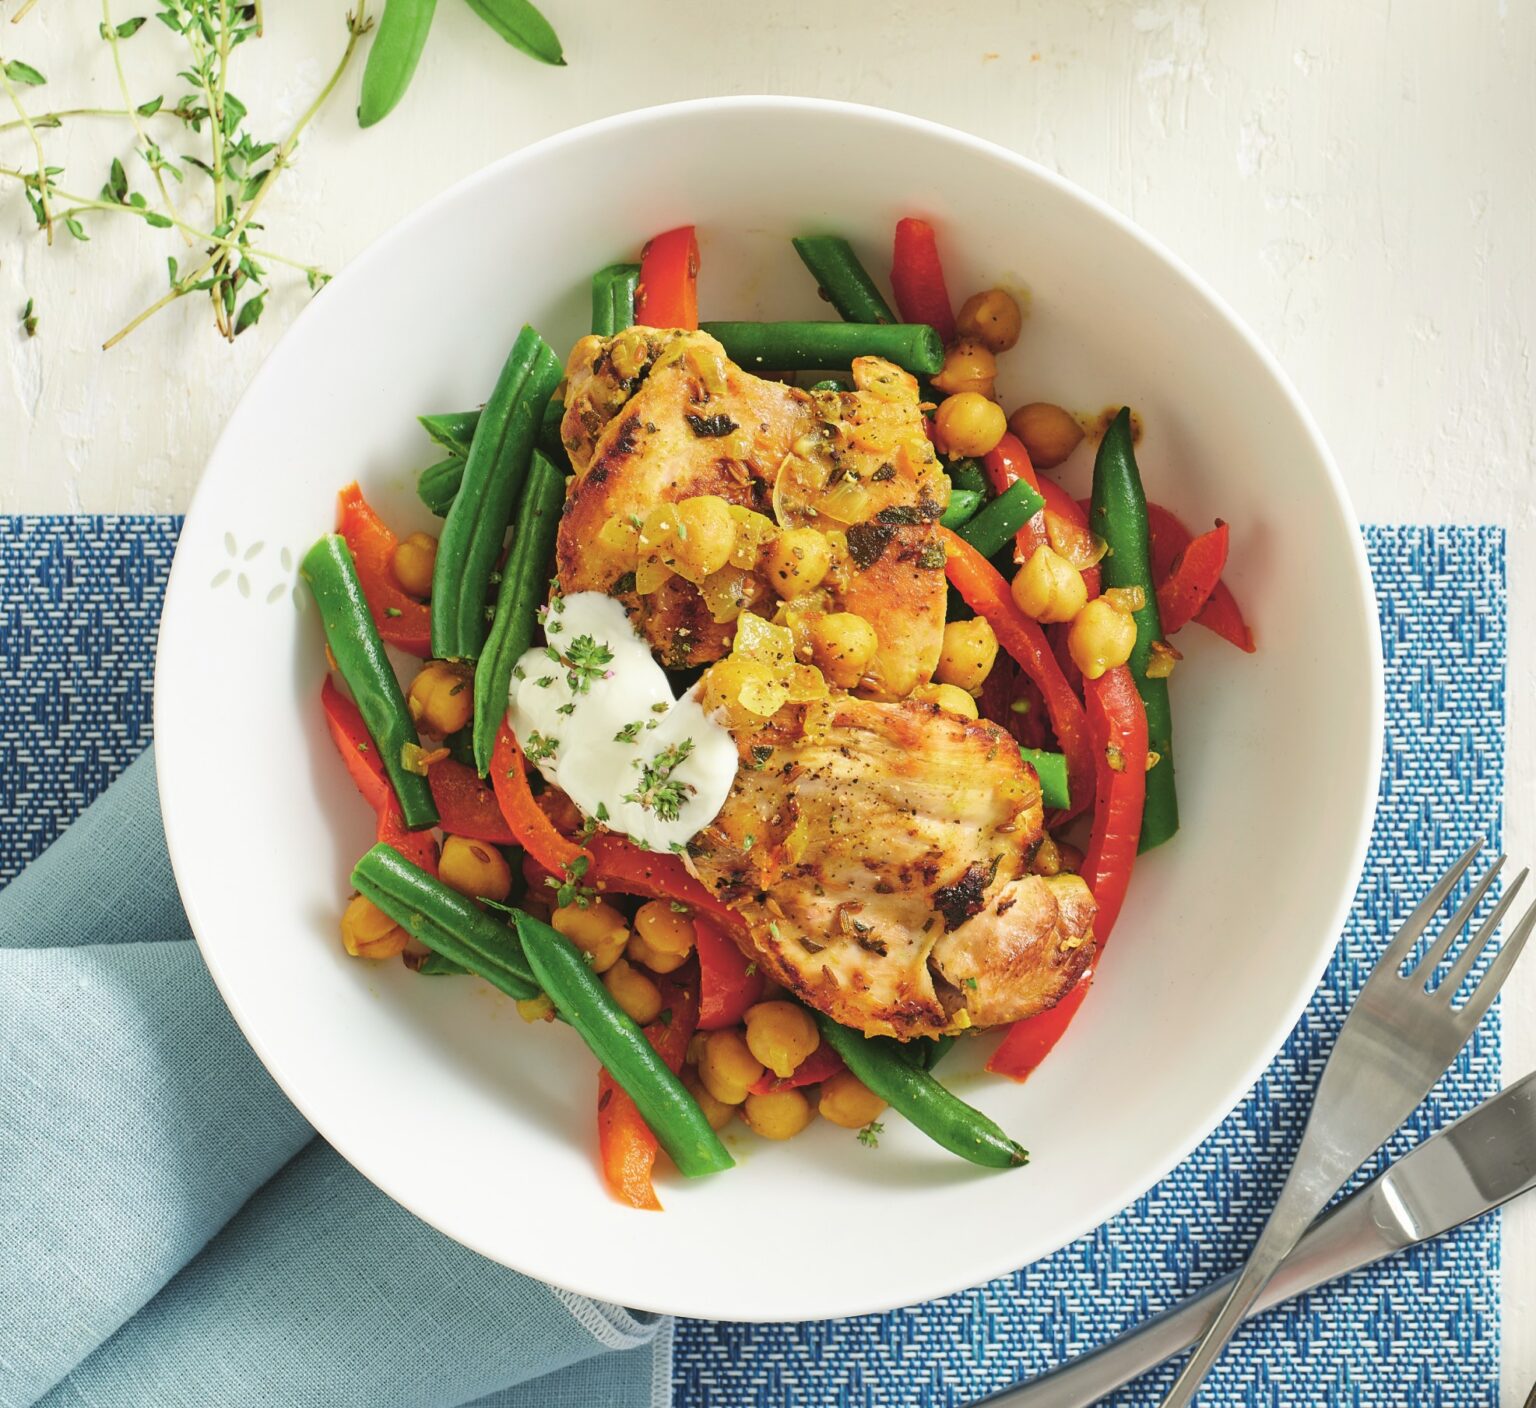 Herby chicken, chickpeas and green beans